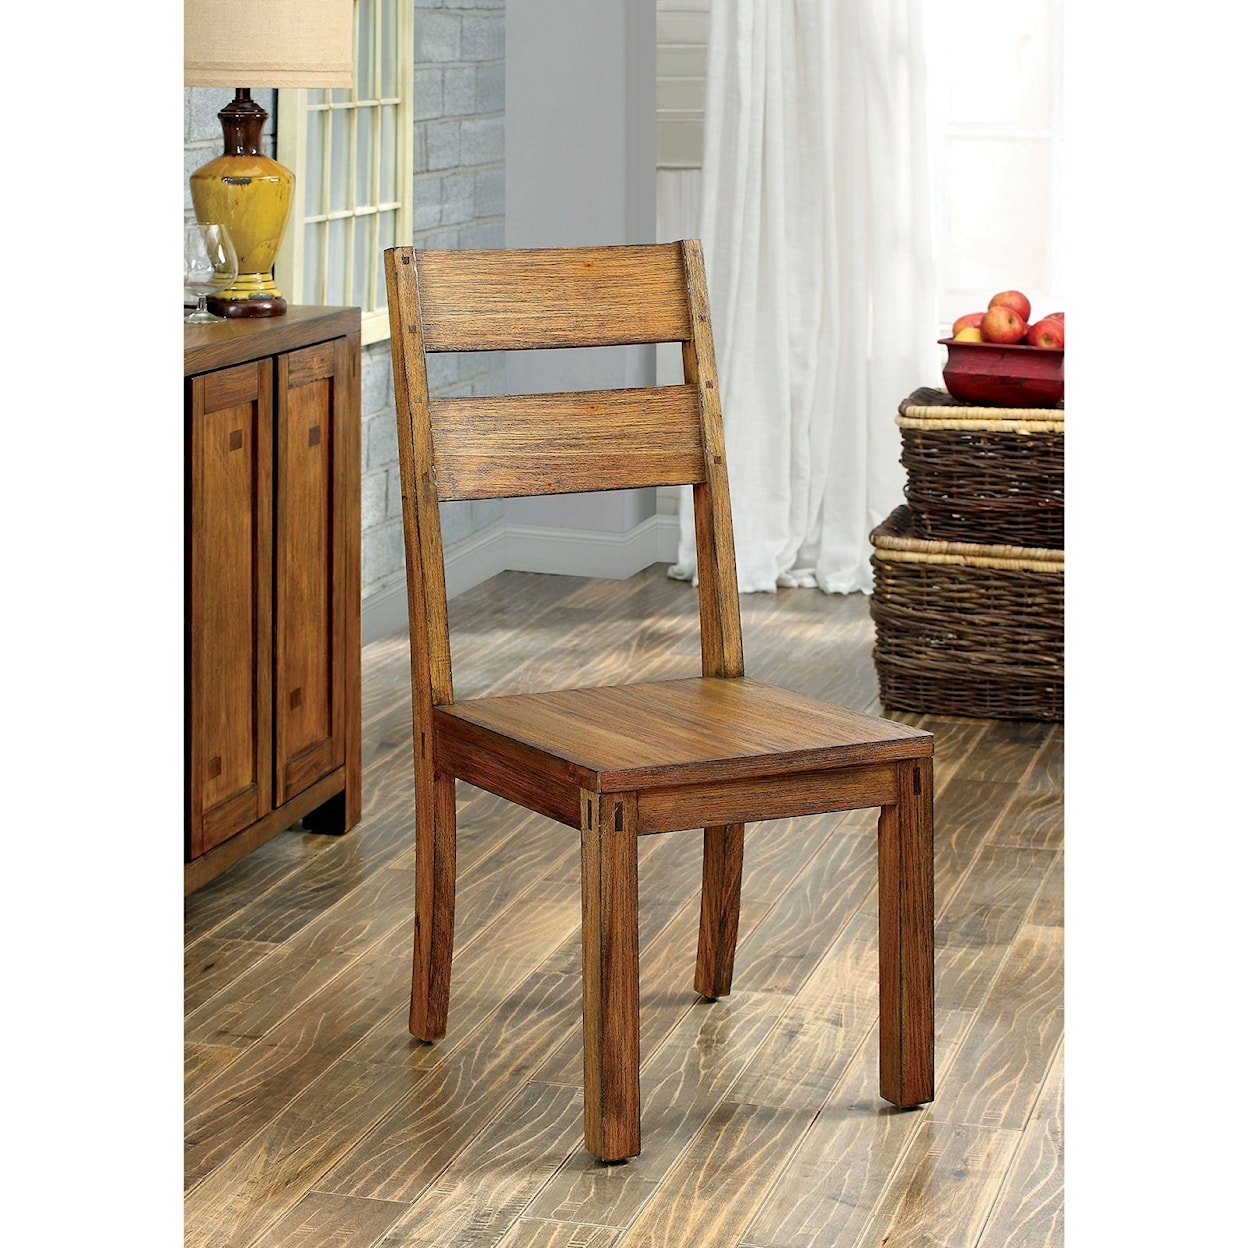 FUSA Frontier Set of 2 Side Chairs